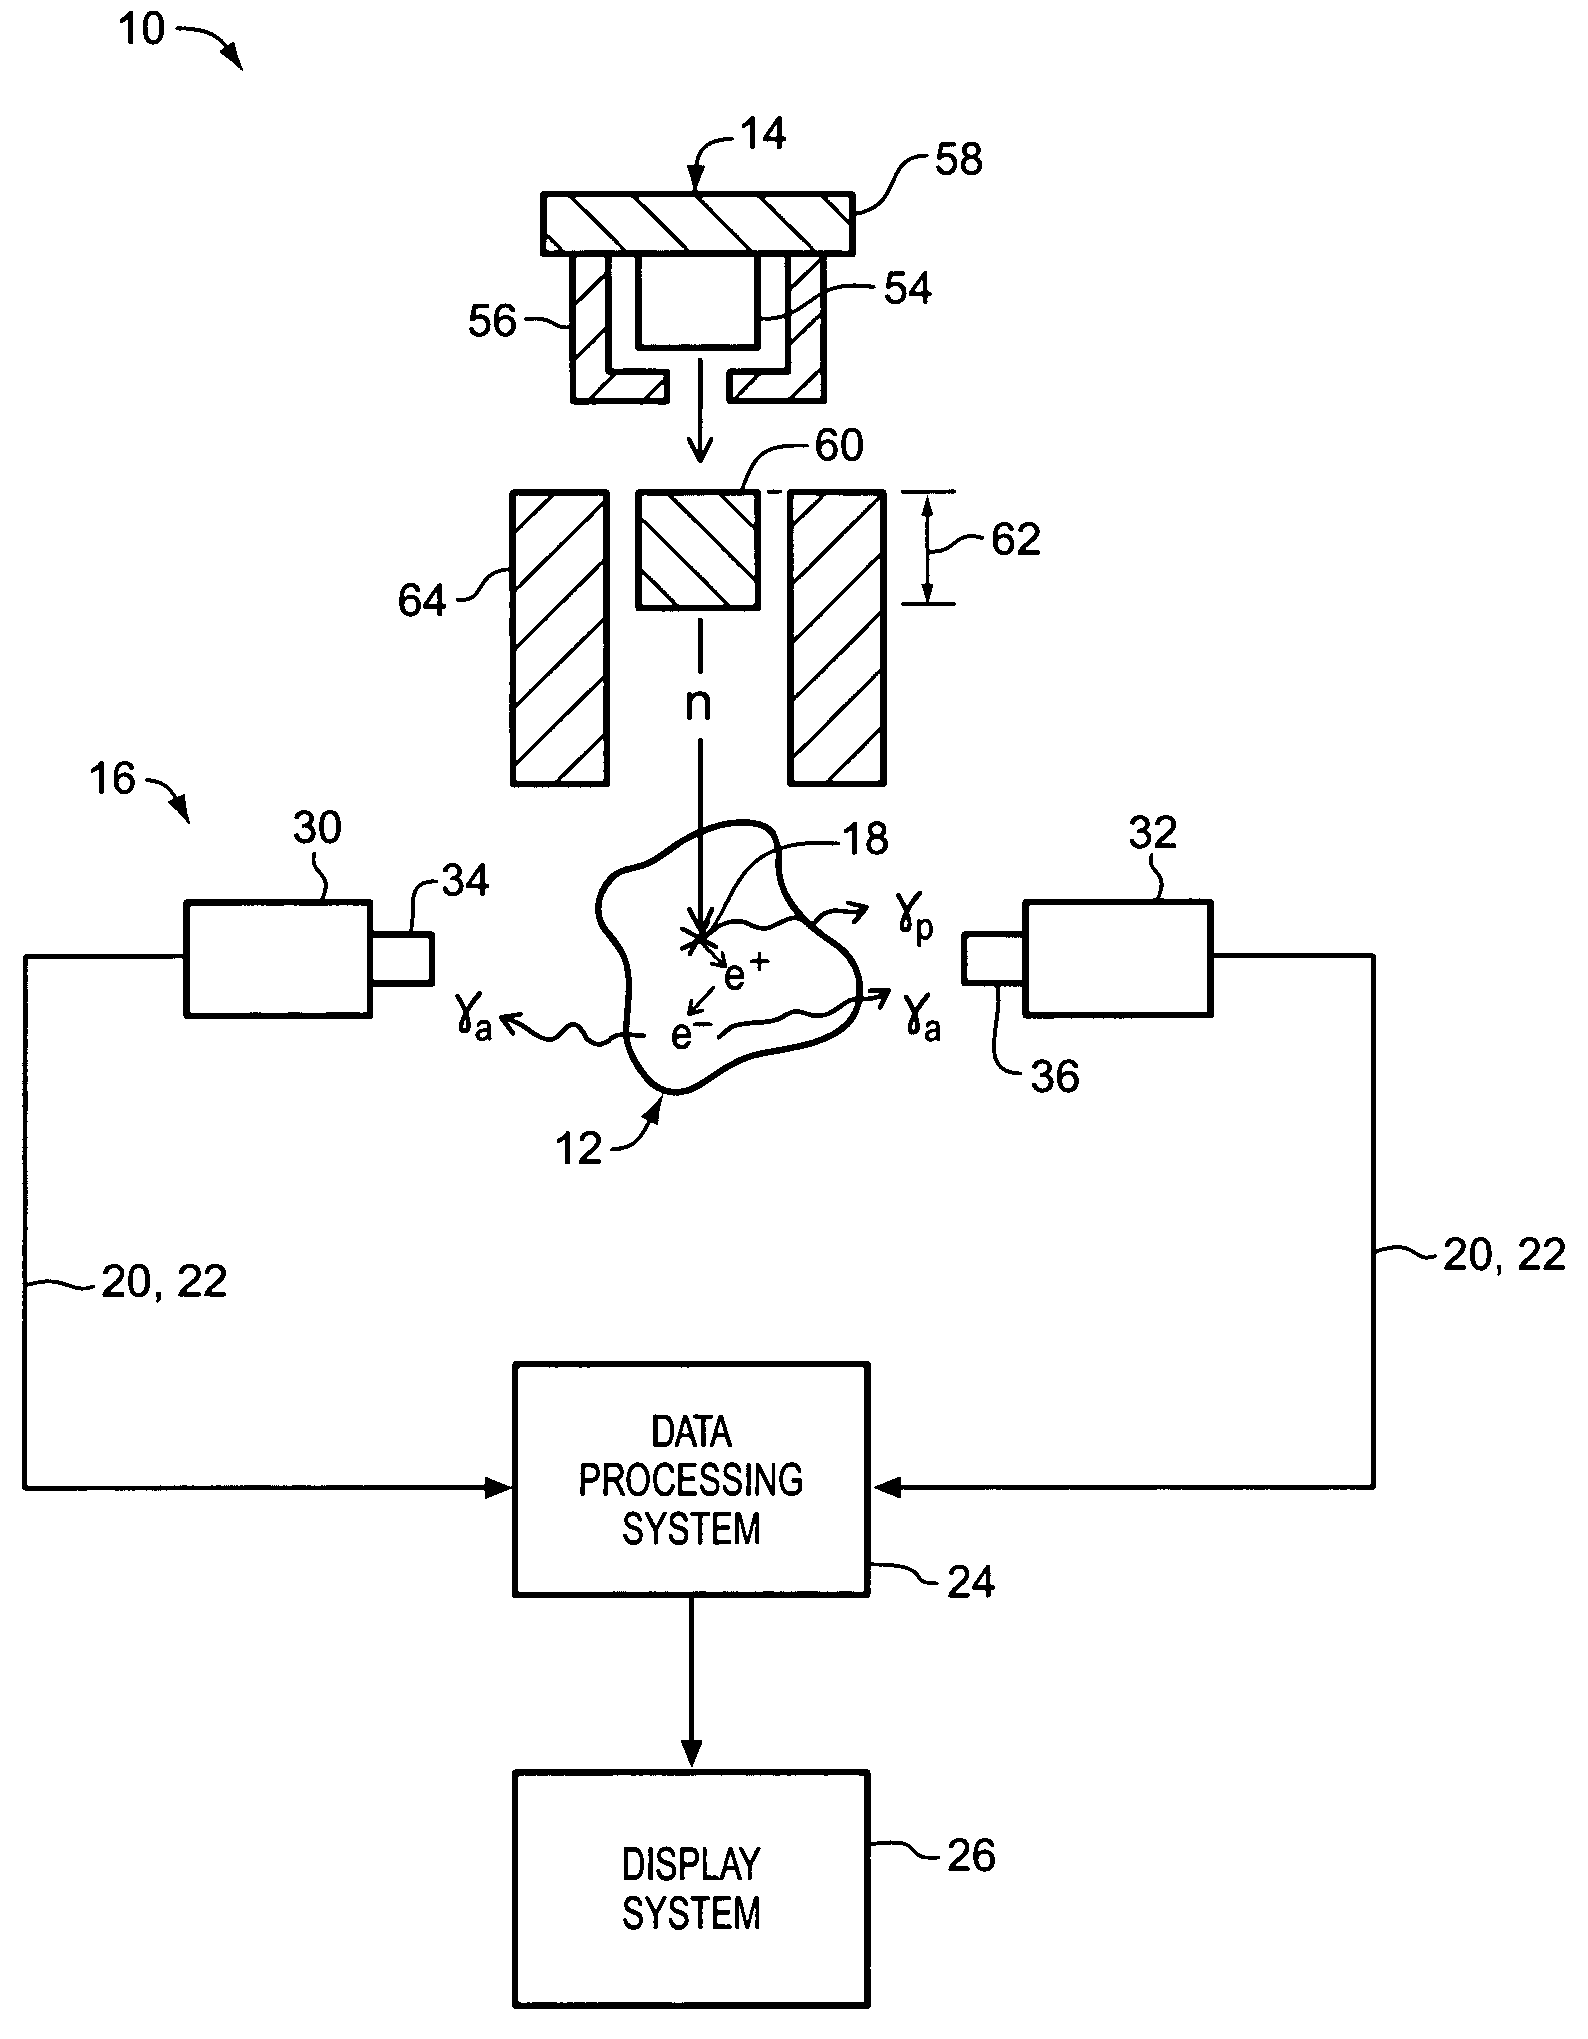 Method for on-line evaluation of materials using prompt gamma ray analysis